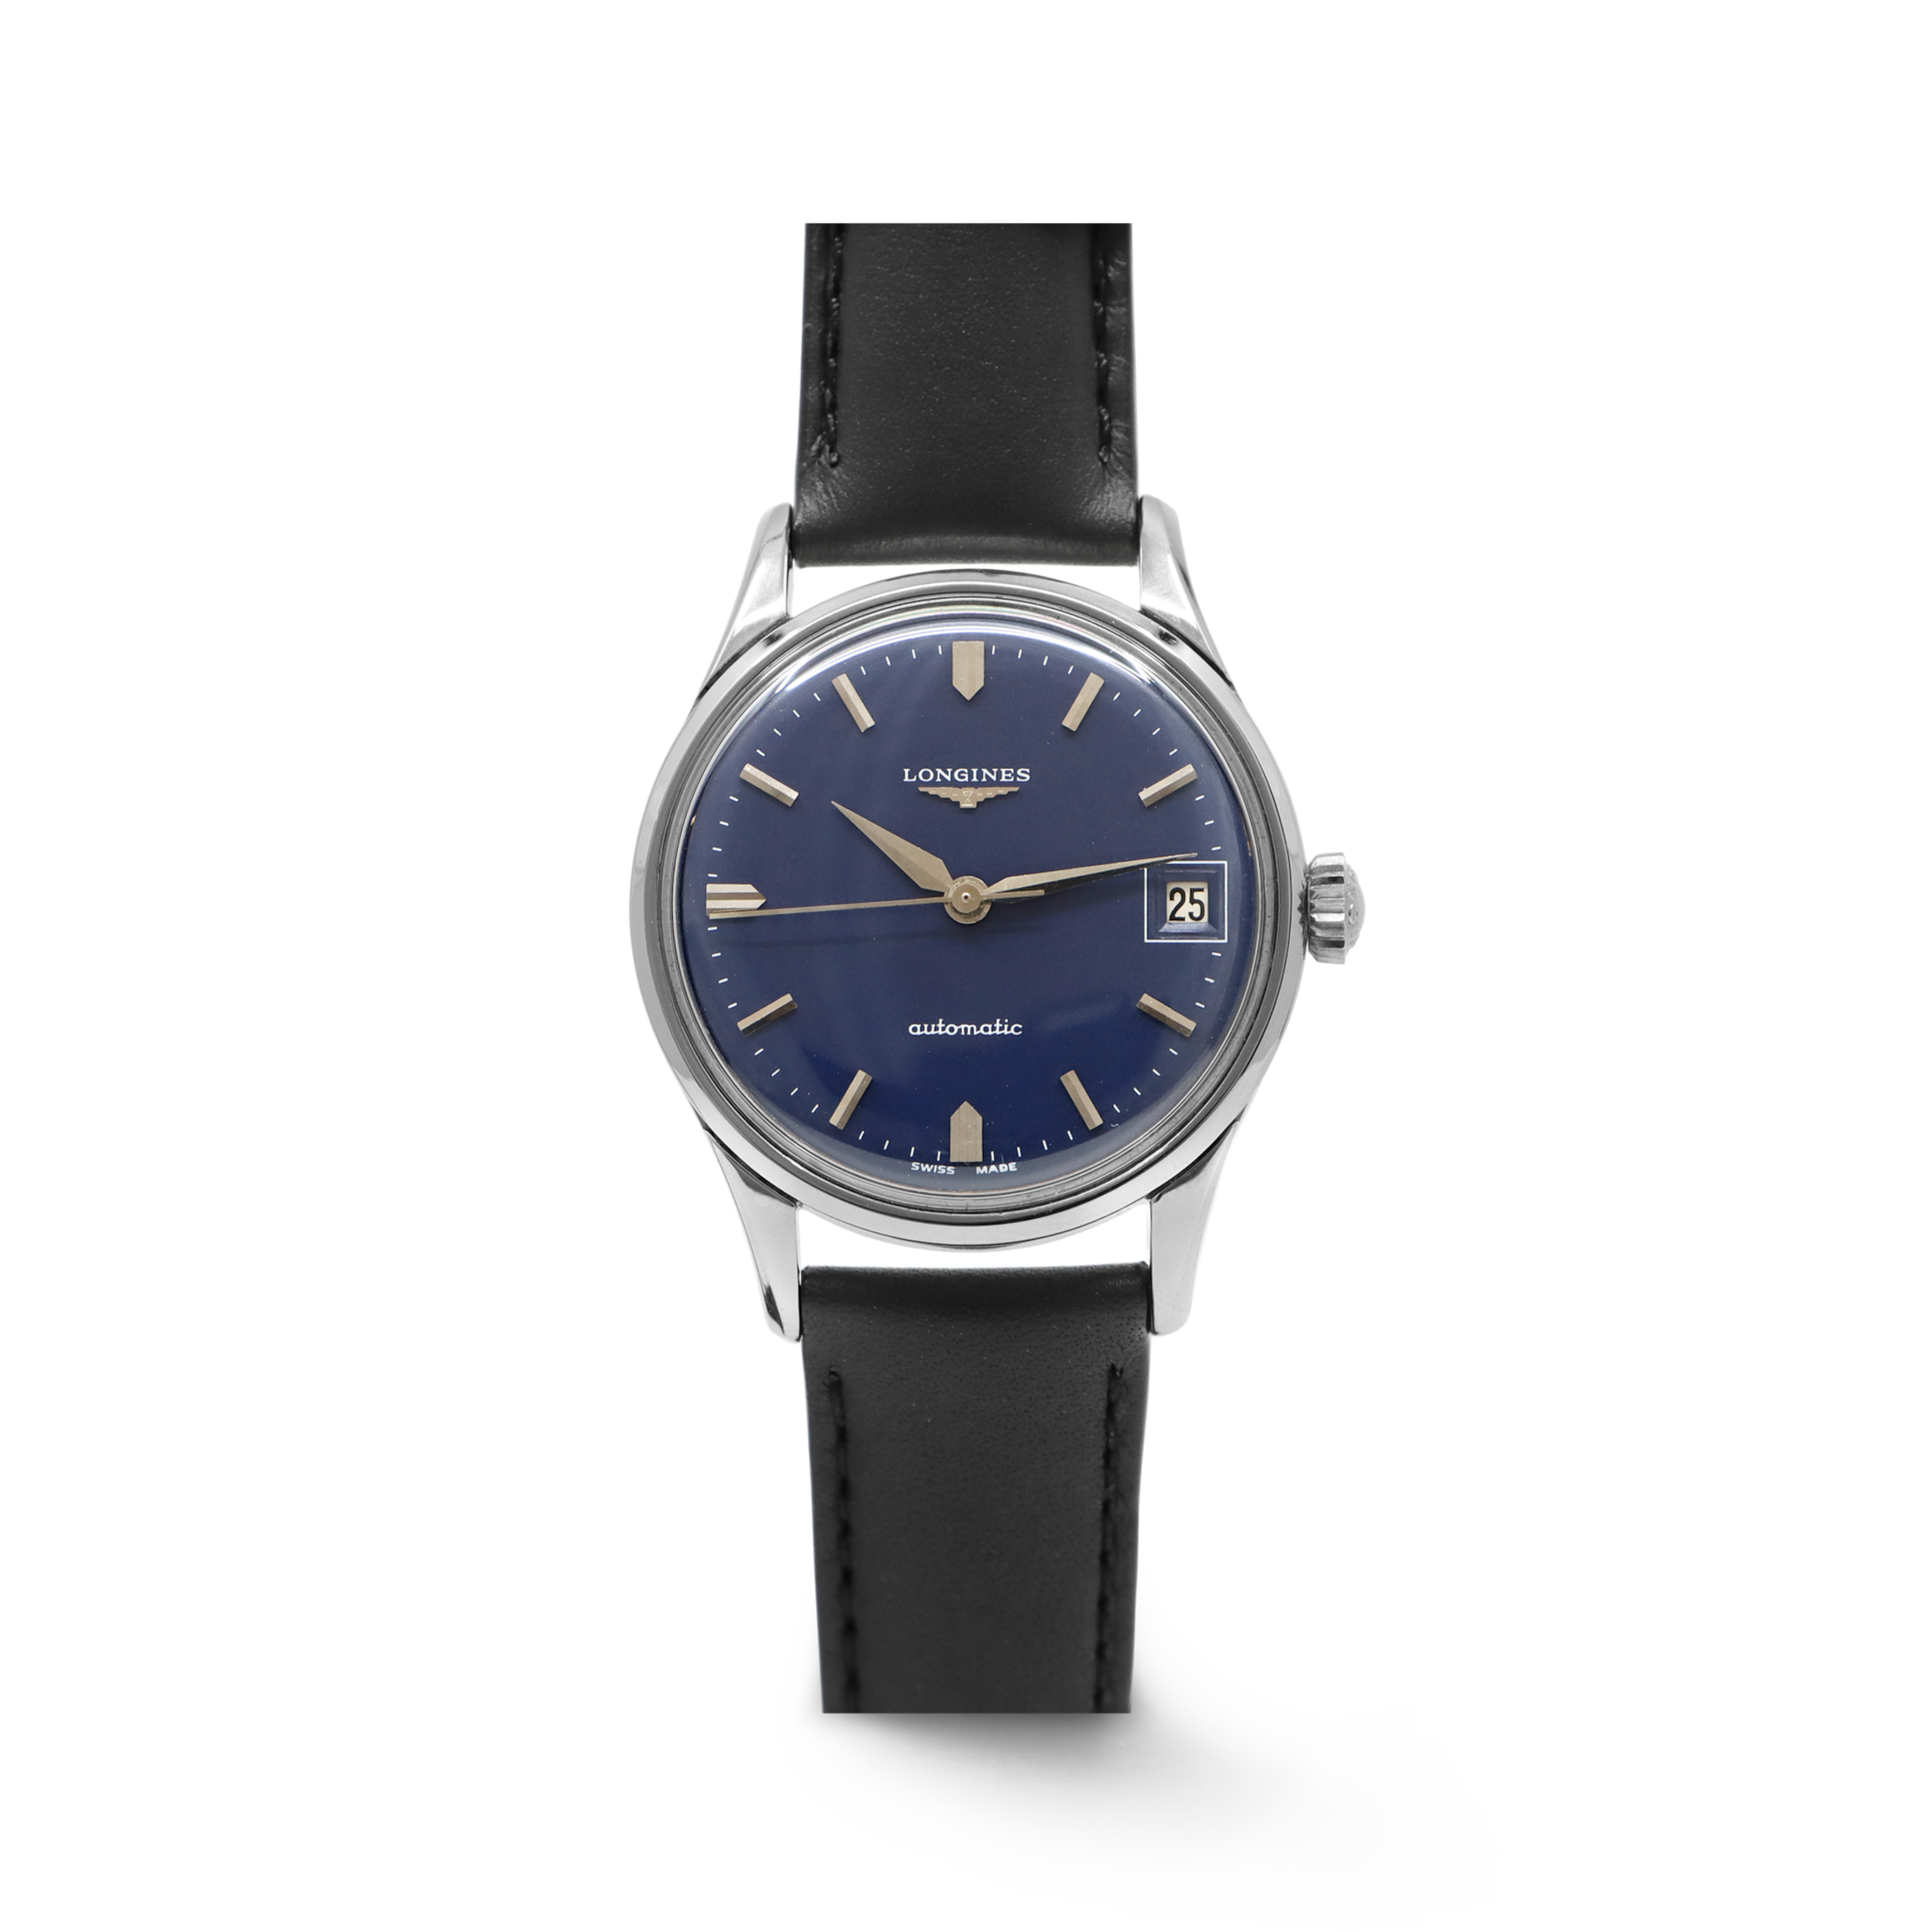 Longines Automatic Wristwatch with Rare Blue Dial from the 1960s